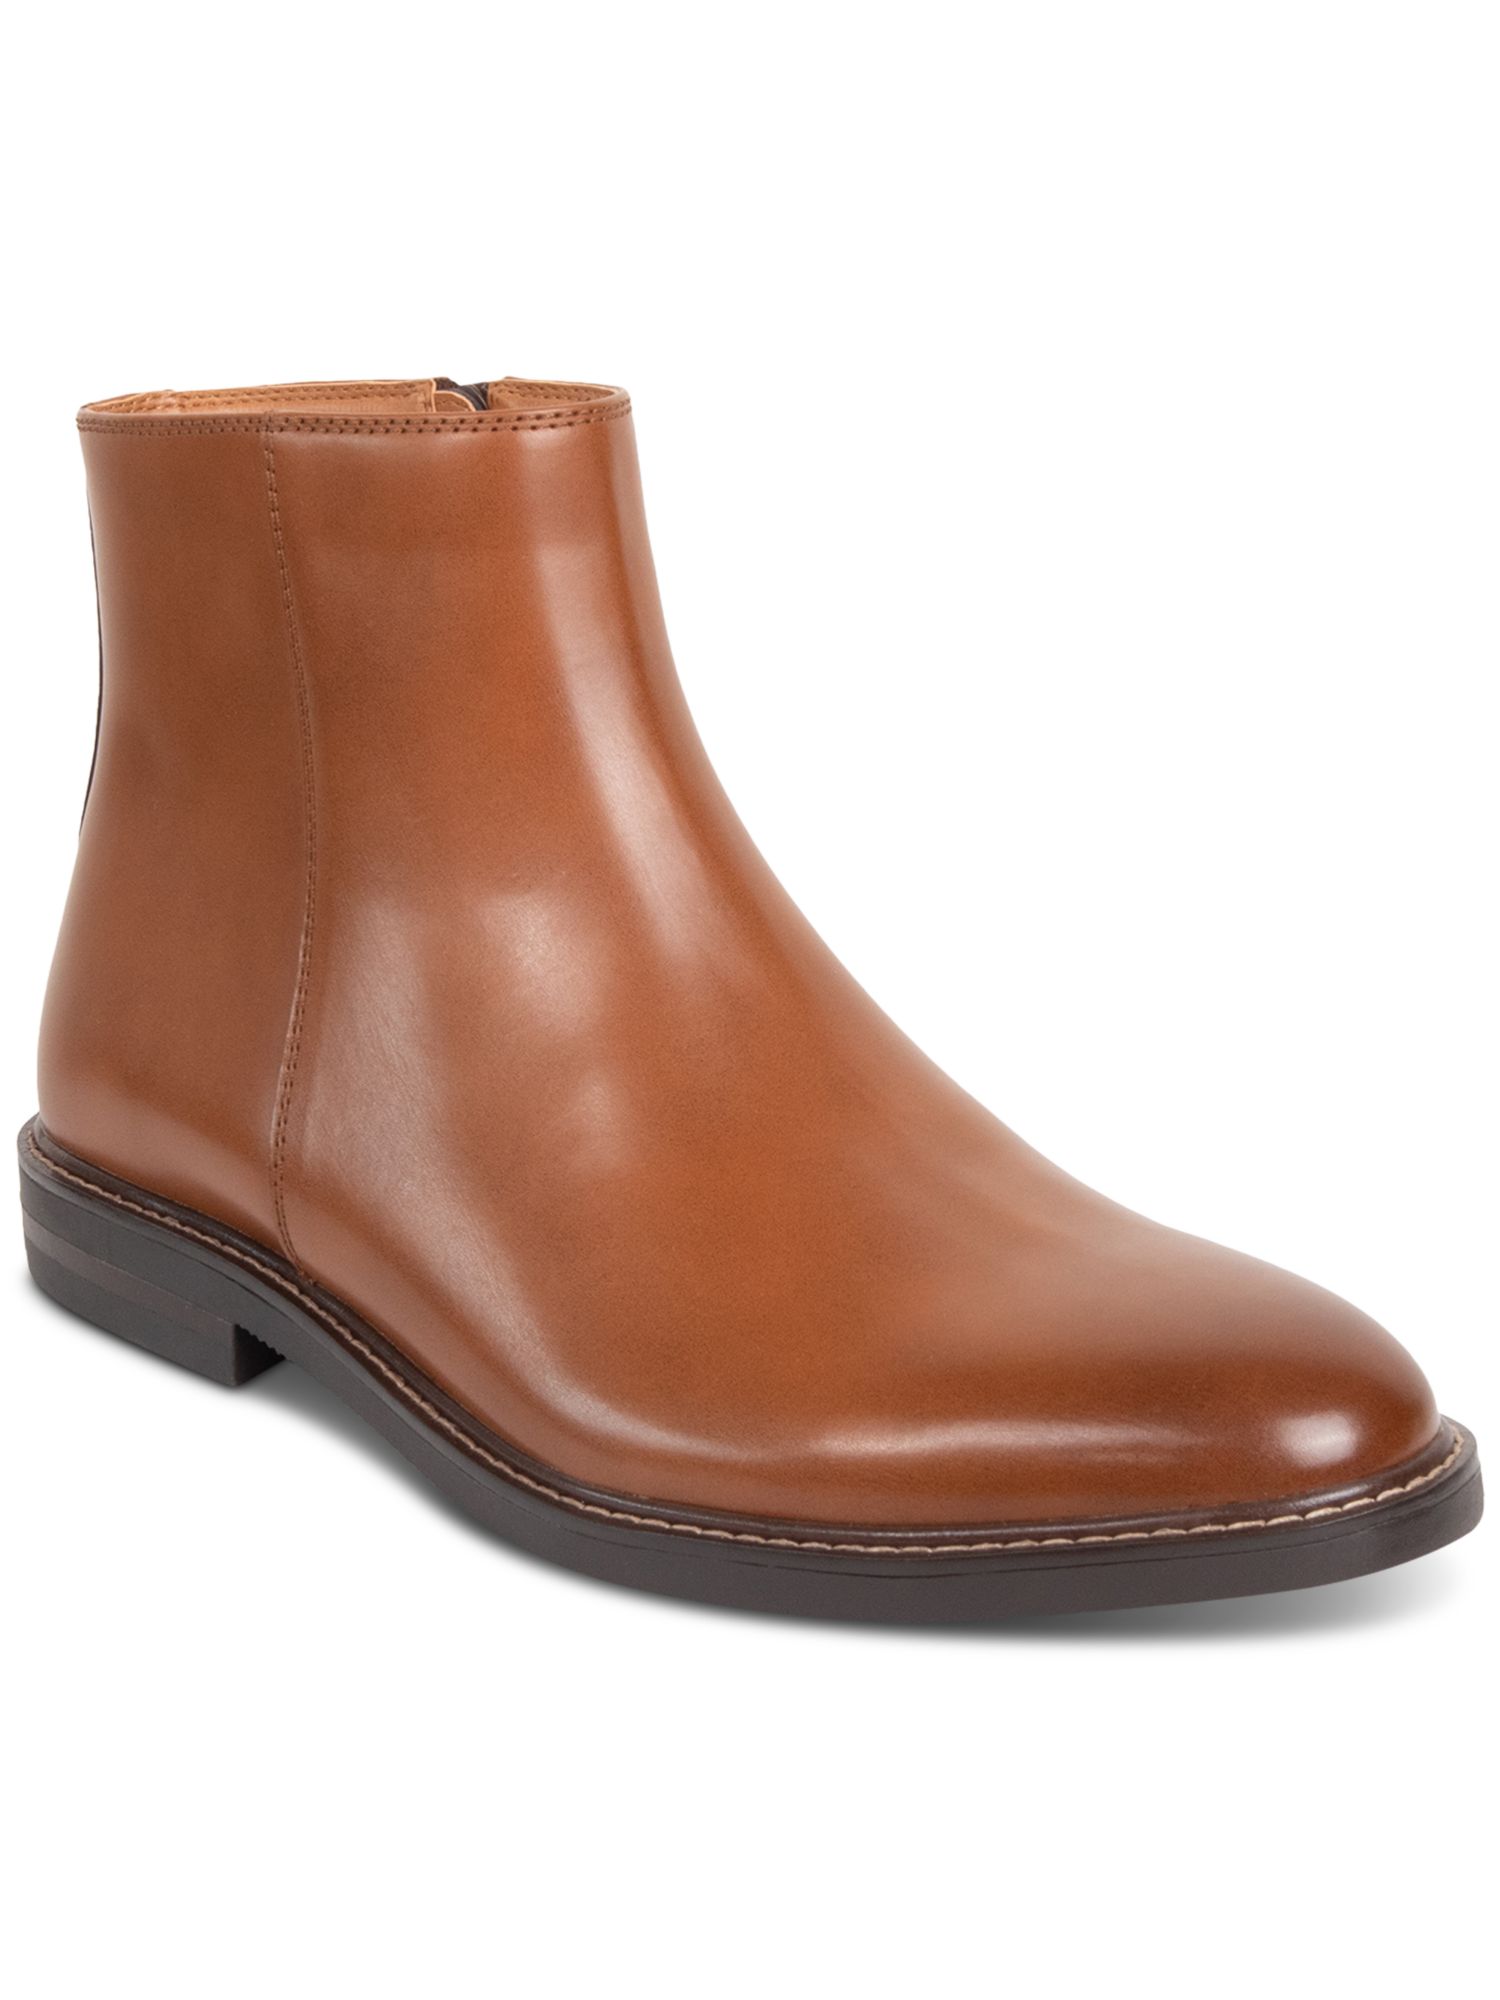 Kenneth Cole REACTION REACTION KENNETH COLE Mens Brown Comfort Ely Round Toe Block Heel Zip-Up Boots Shoes 9 M